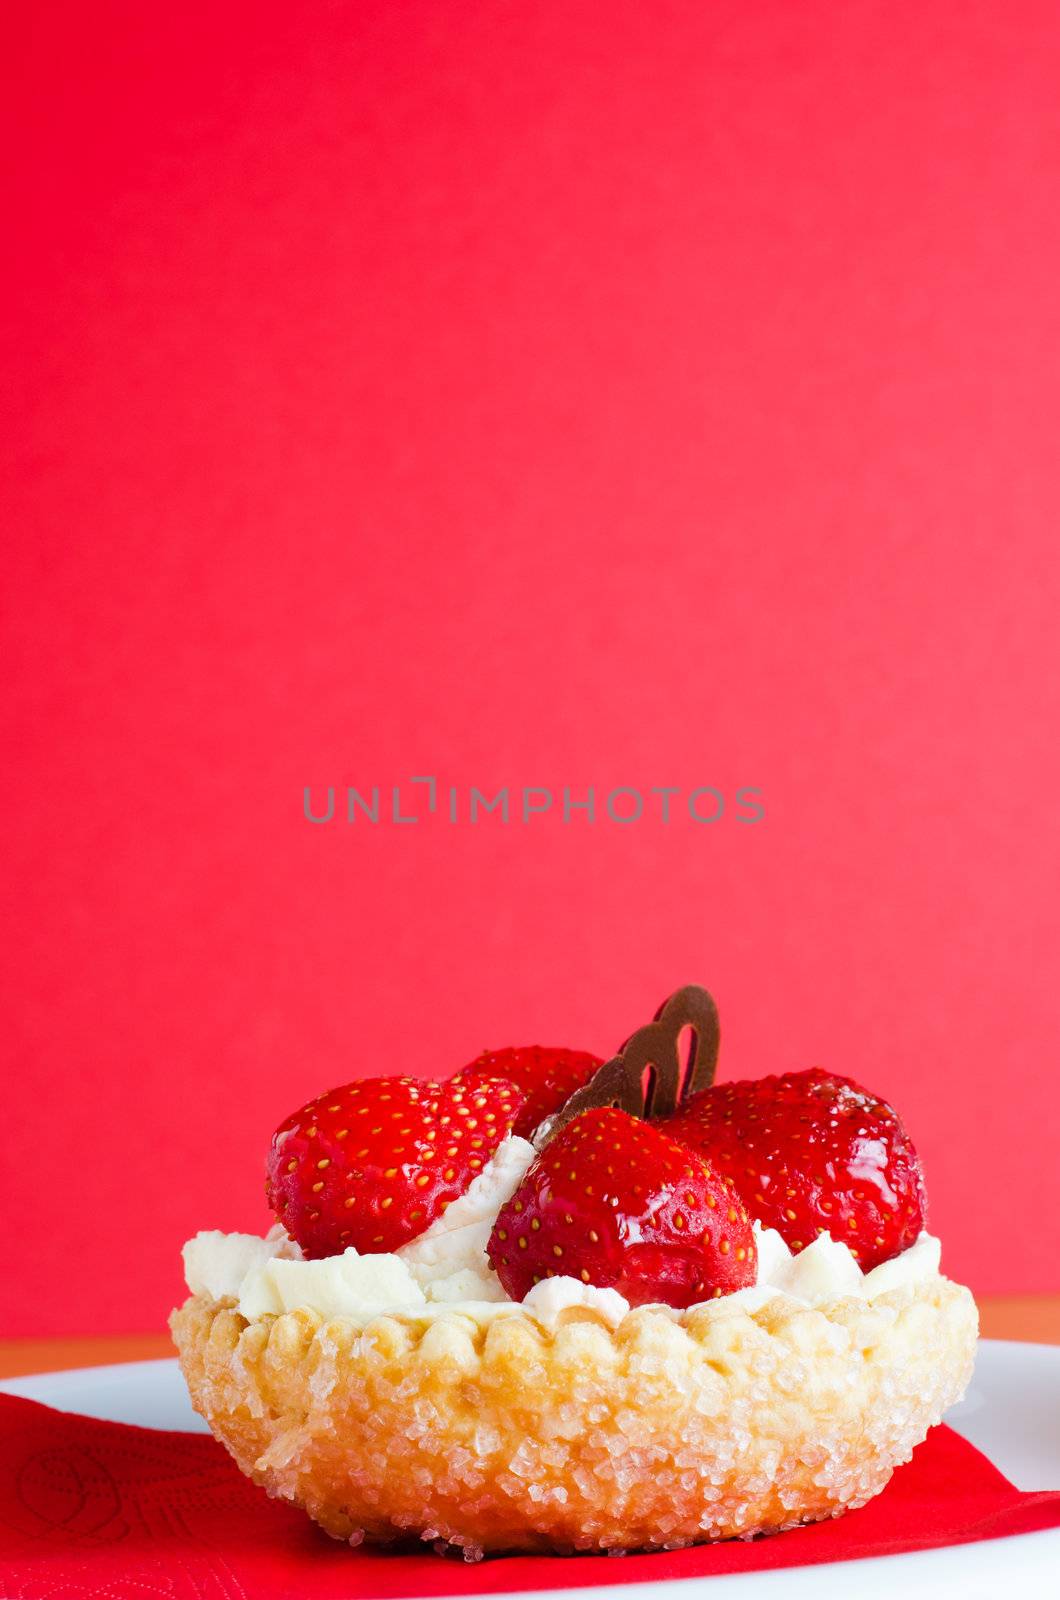 Strawberry and cream Cake by frannyanne